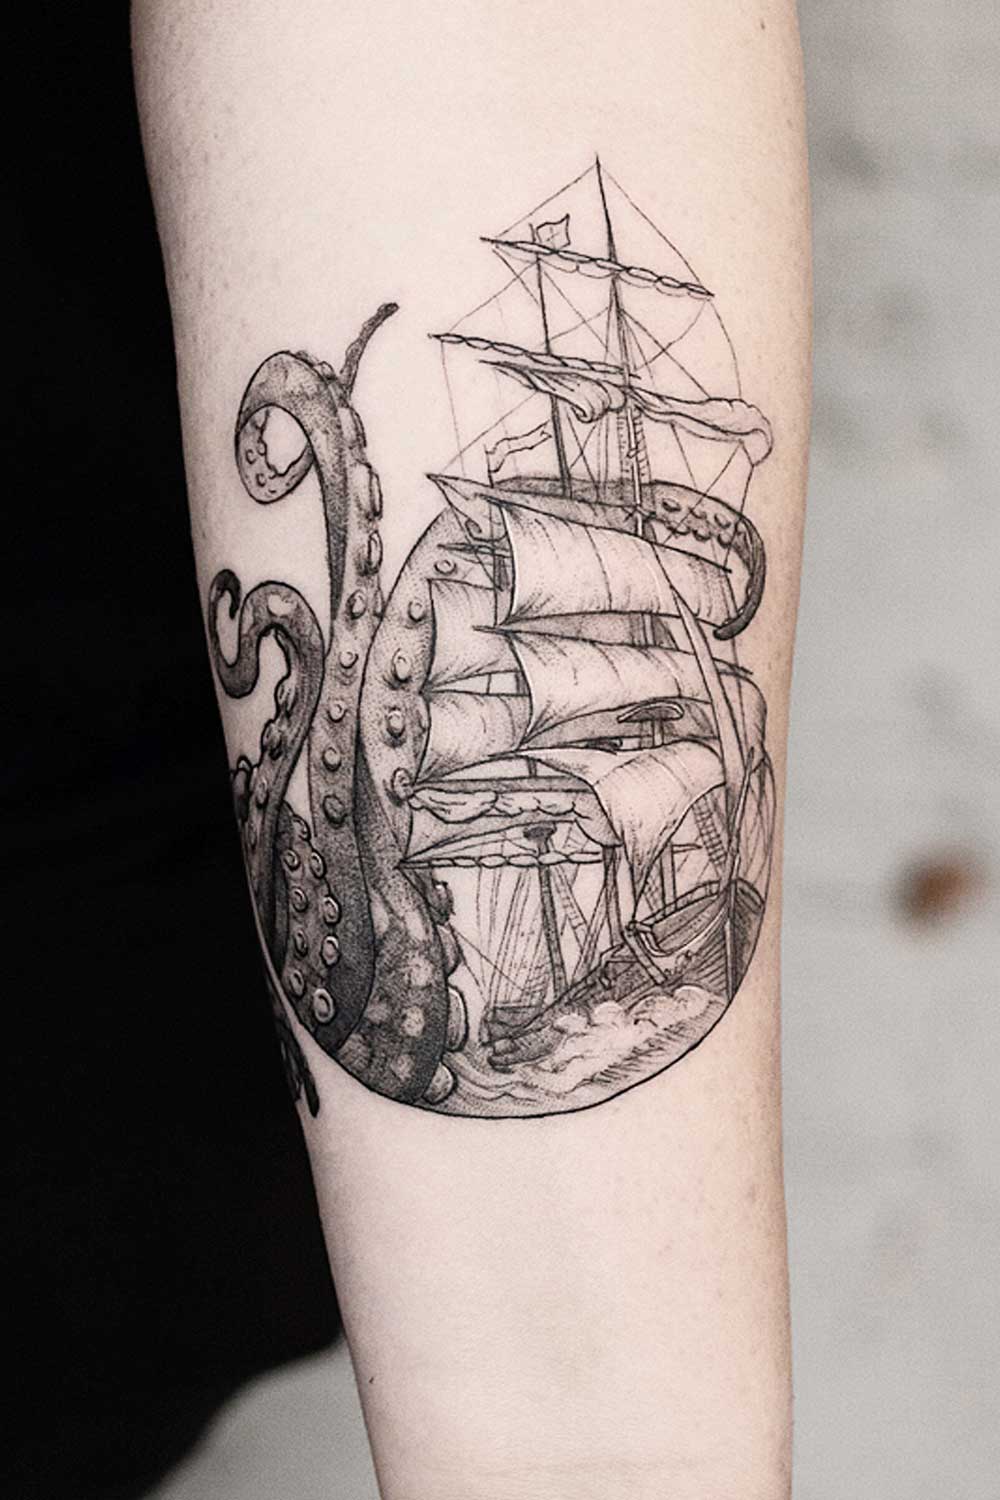 Octopus Tentacles Tattoo with Ship